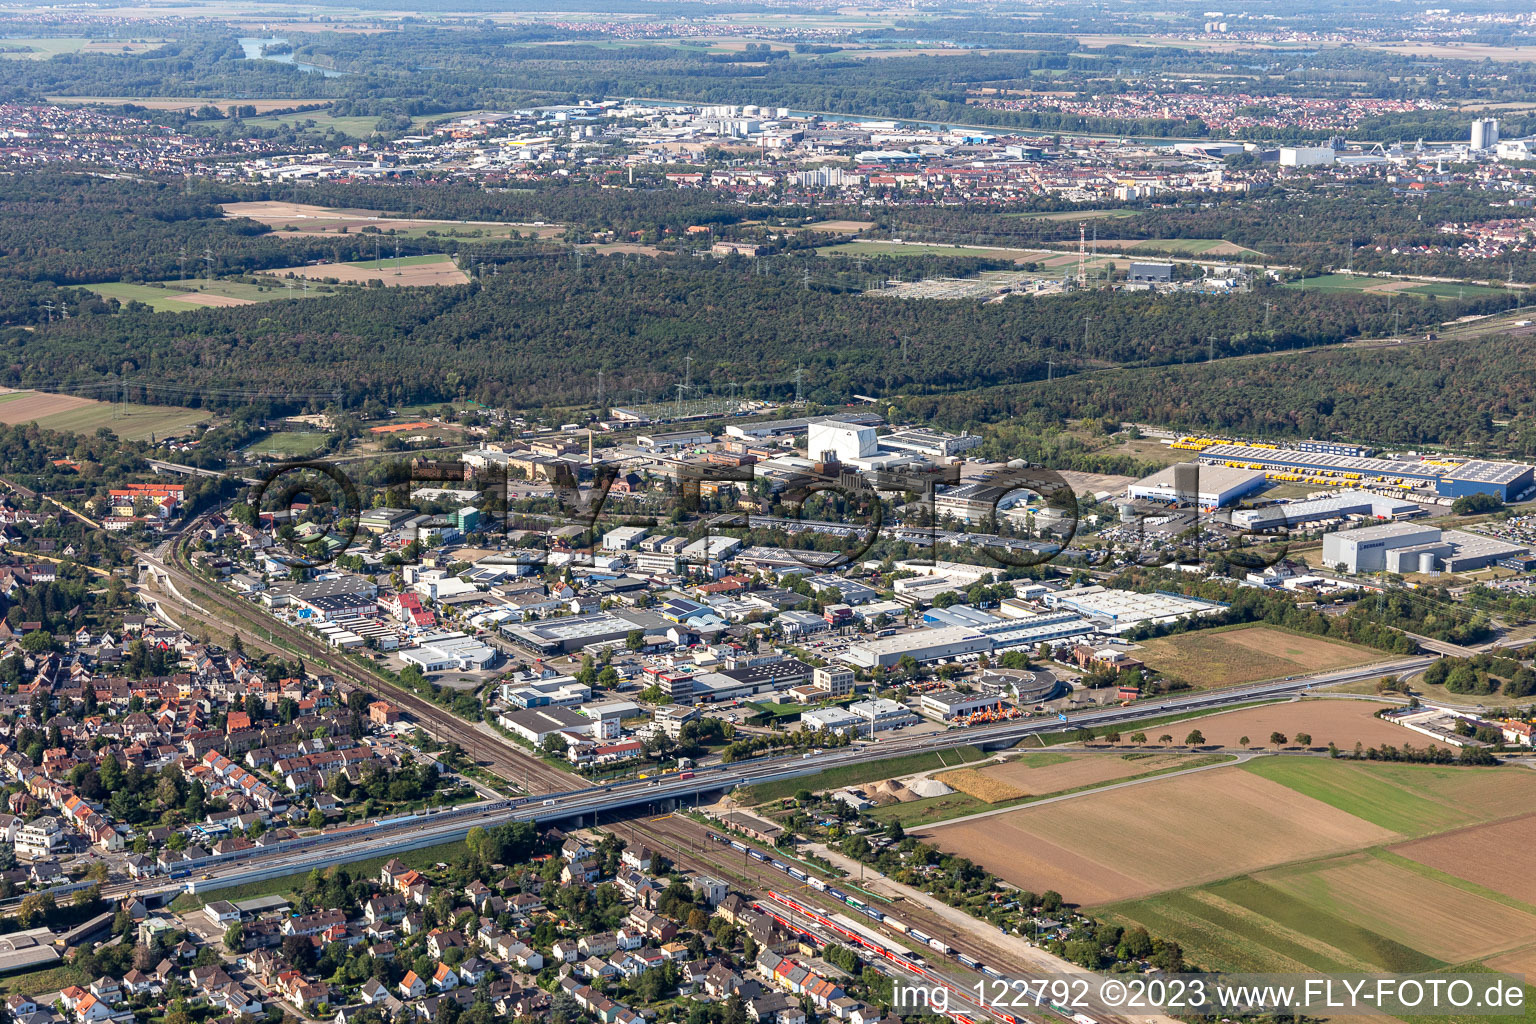 Industrial area Friedrichsfeld in the district Friedrichsfeld in Mannheim in the state Baden-Wuerttemberg, Germany